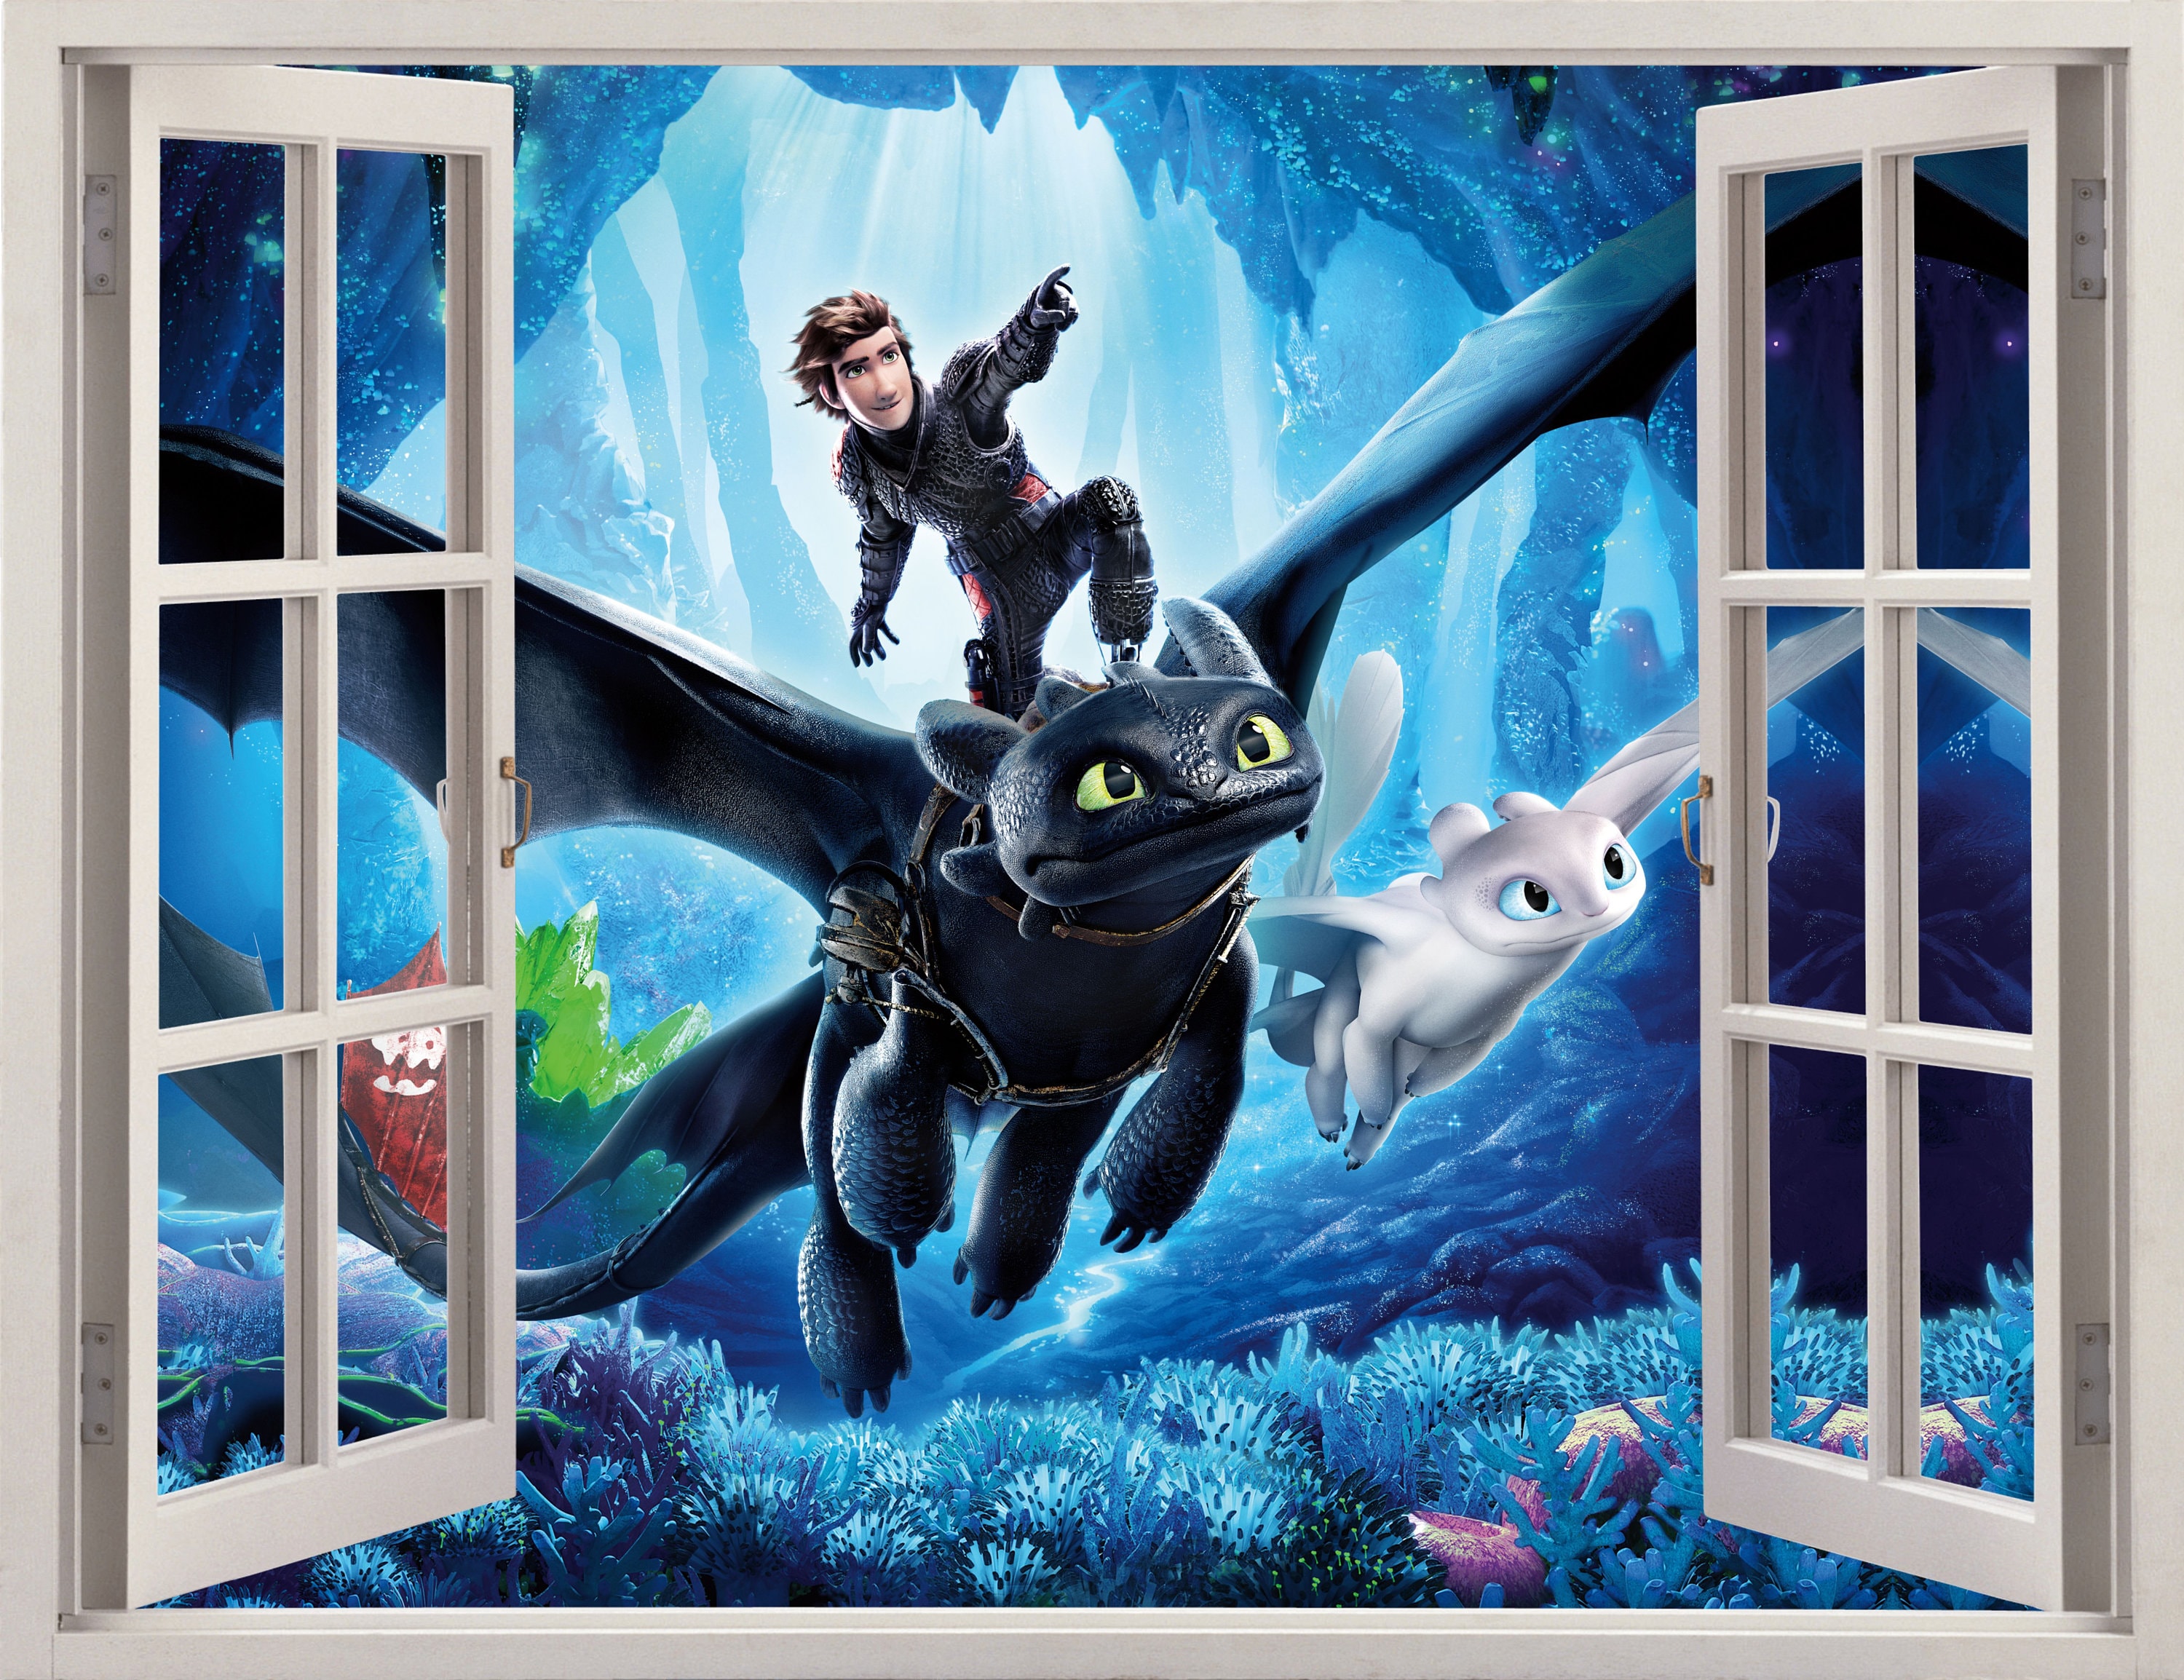 How to Train Your Dragon Movie 3D Wallpaper Decal Toothless - Etsy